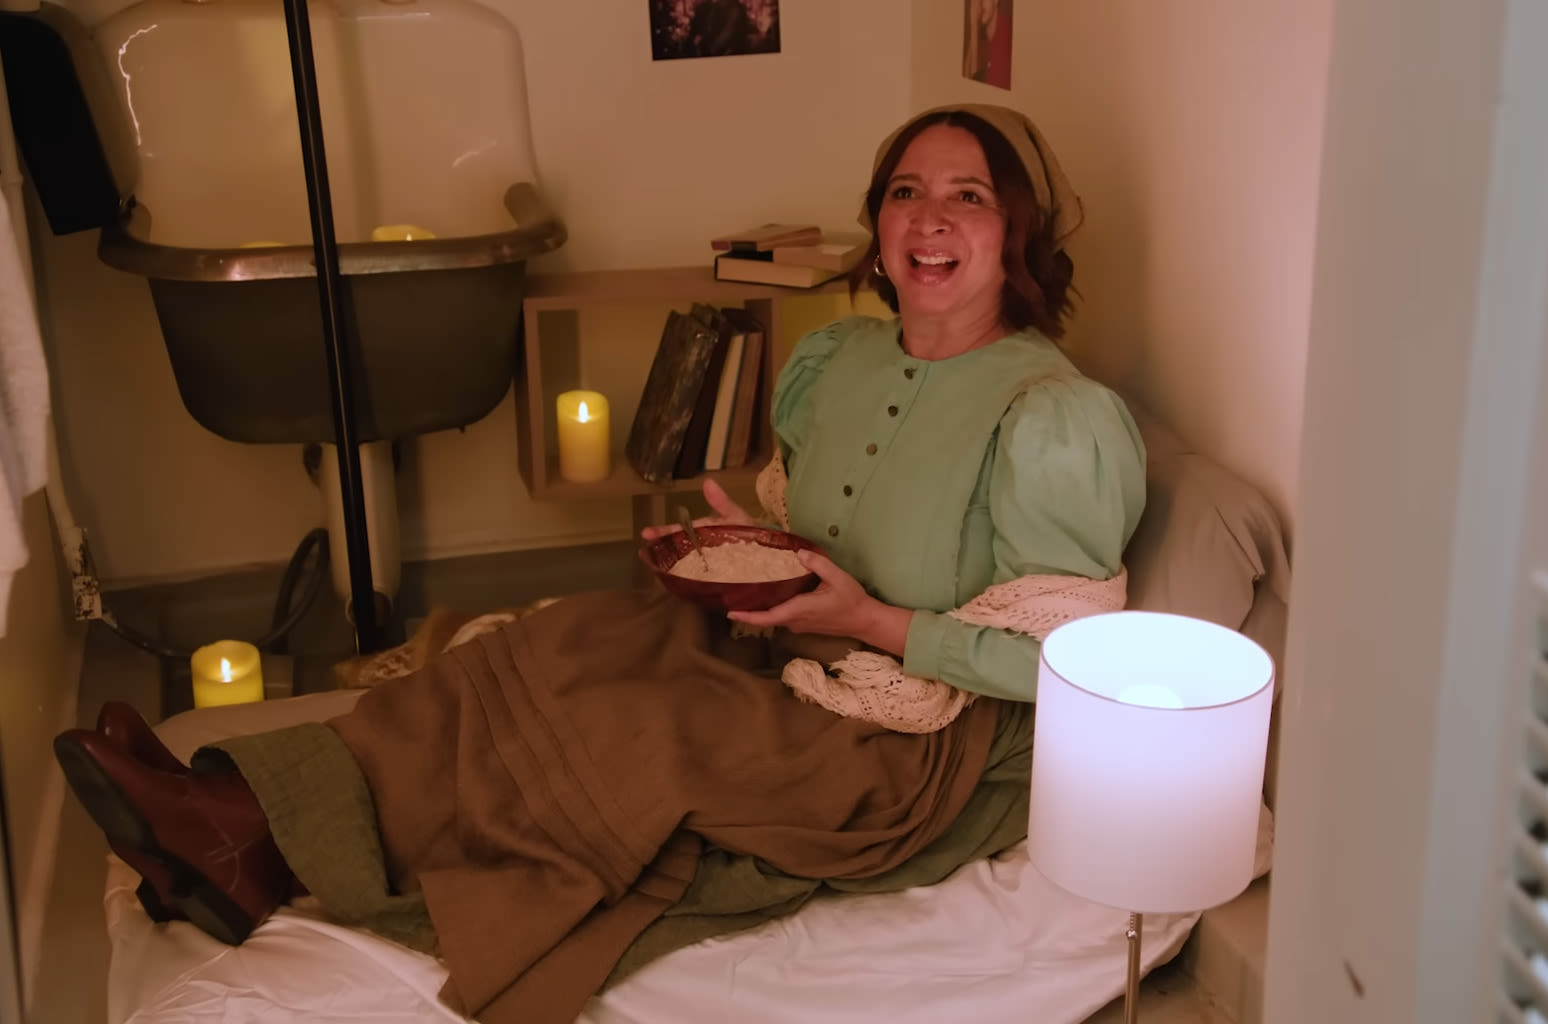 Maya Rudolph Reveals She’s Been Living in ‘SNL’ Closet Since 2007 in New Promo